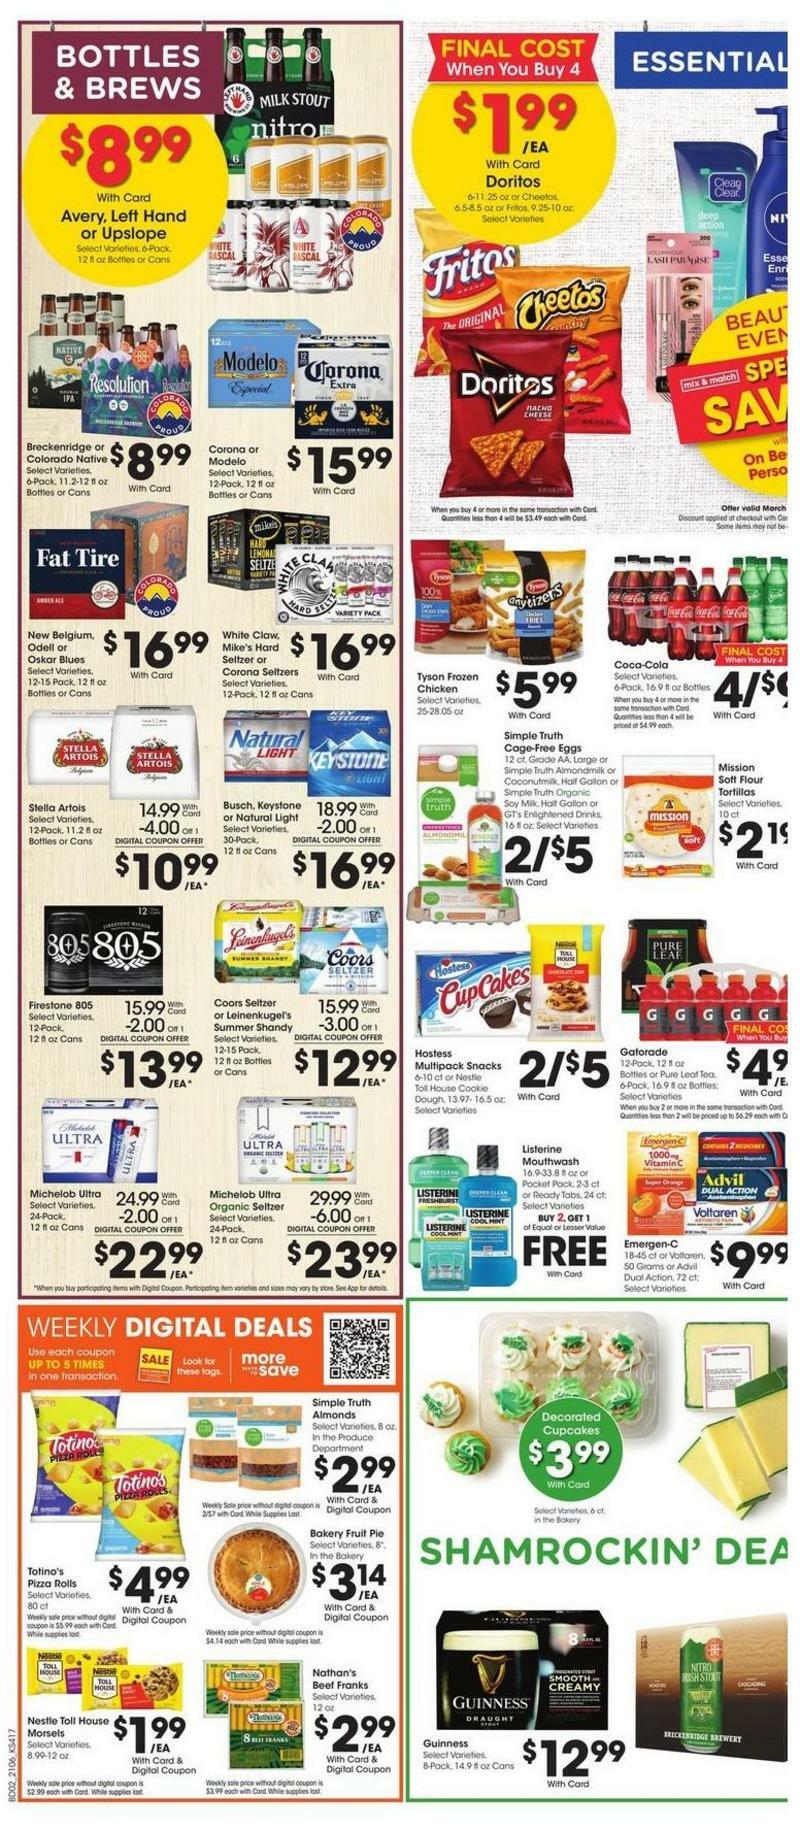 City Market Weekly Ad from March 10